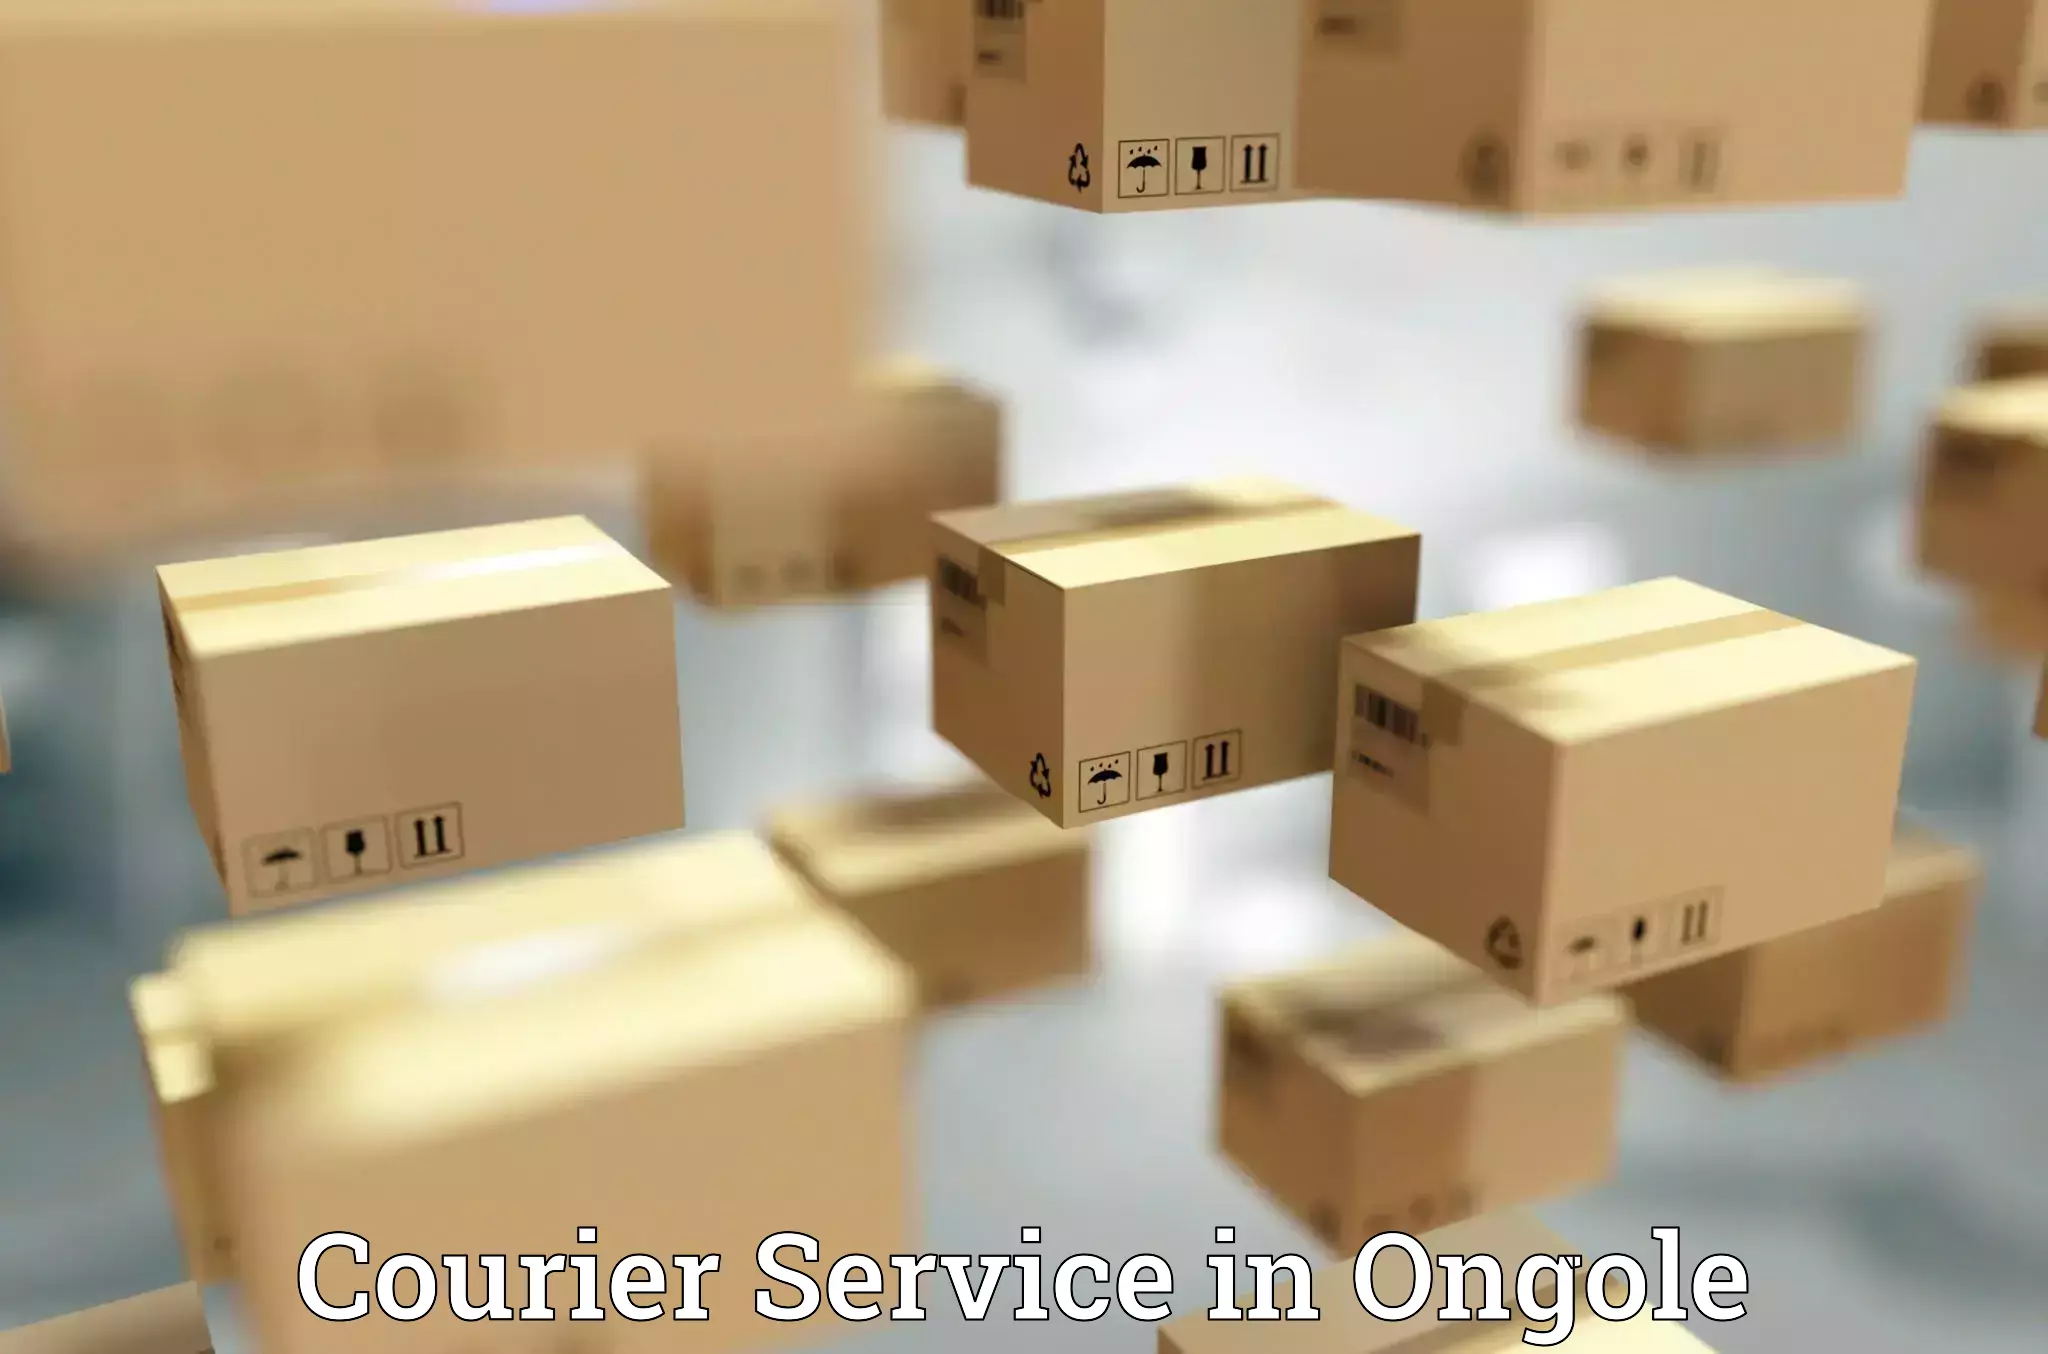 Delivery service partnership in Ongole